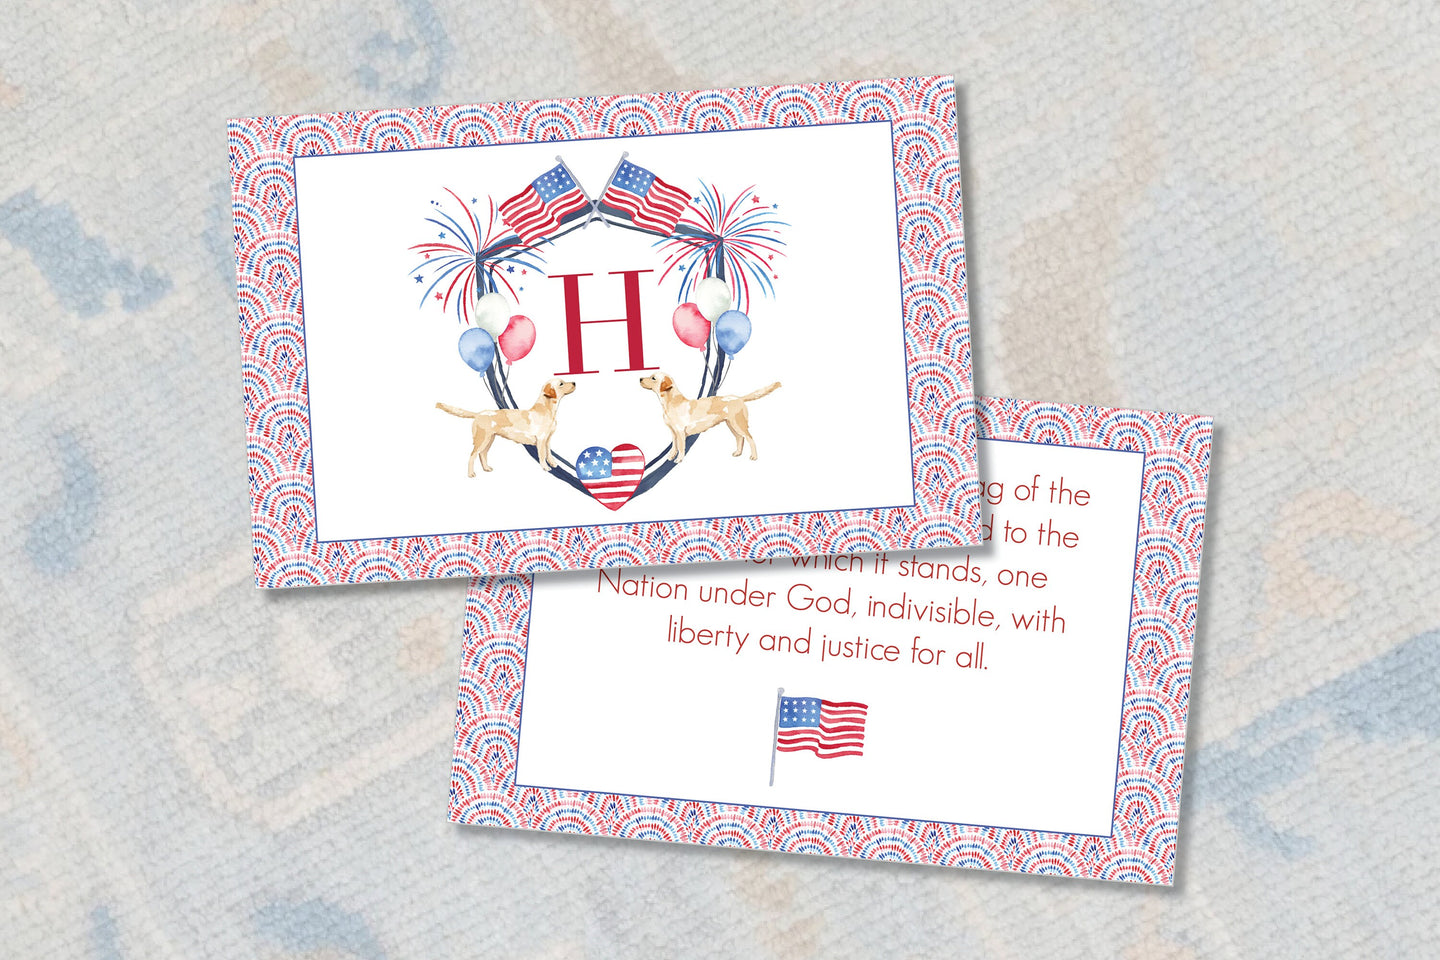 Personalized Summertime Placemat / Fourth of July Placemat / USA Placemat / Red, White, and Two Placemat / Laminated Placemat